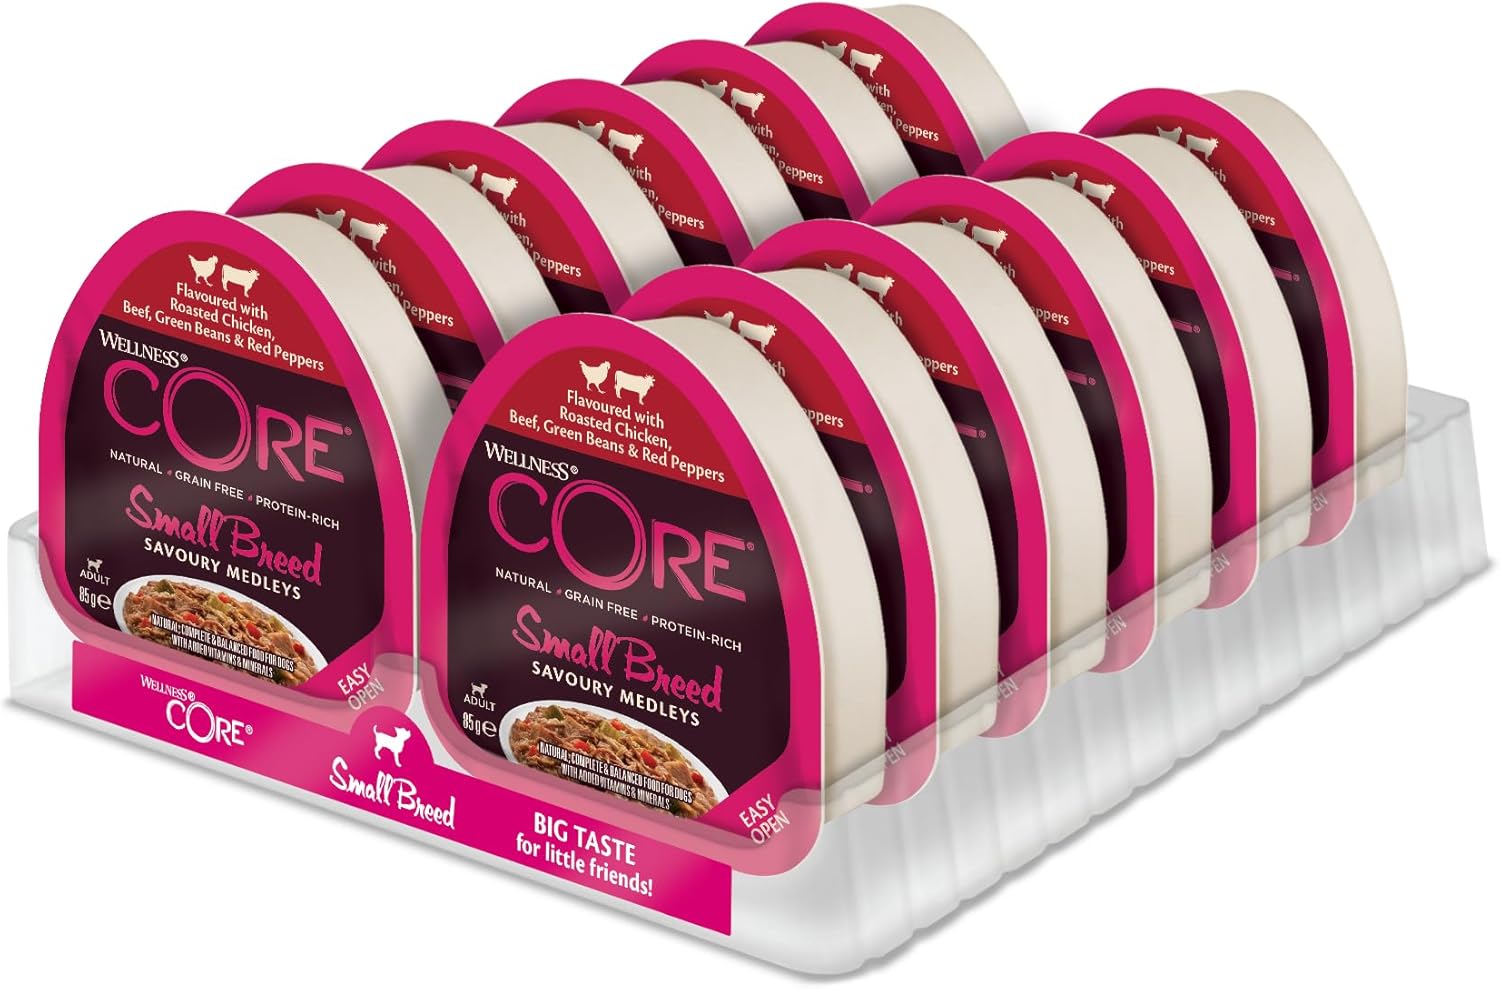 Wellness CORE Small Breed Savoury Medleys, Wet Dog Food Small Dogs, Dog Food Wet Smaller Breed, Grain Free, High Meat Content, Chicken & Beef, 12 X 85 G?10455